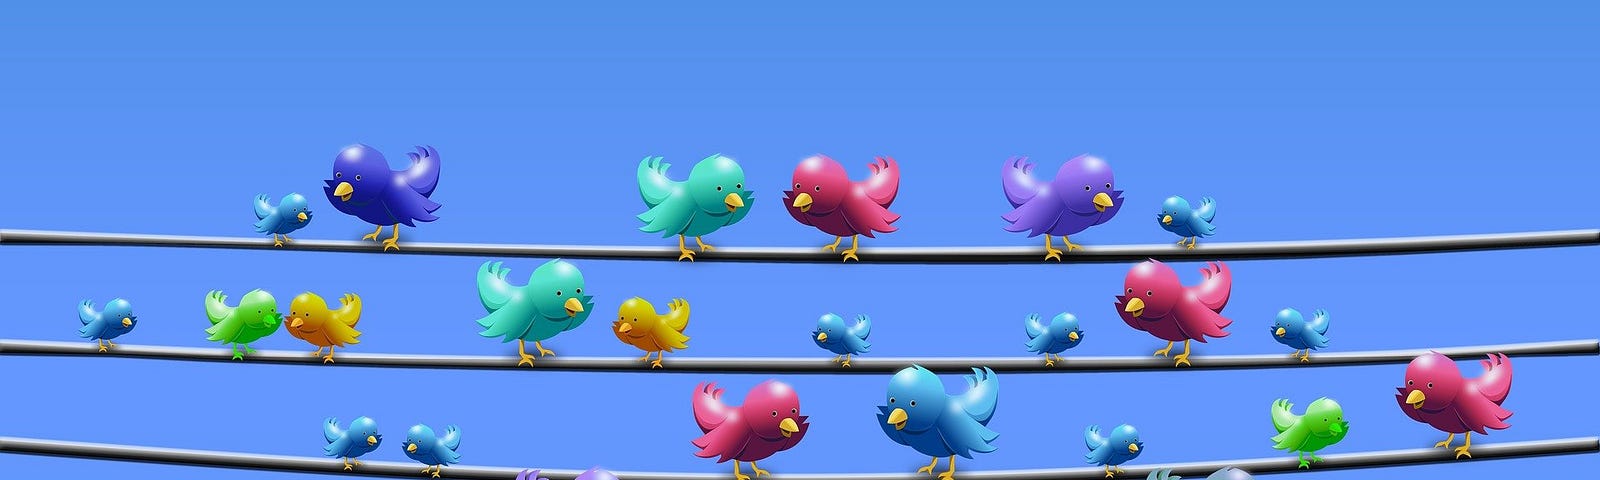 Twitter birds on telephone wires